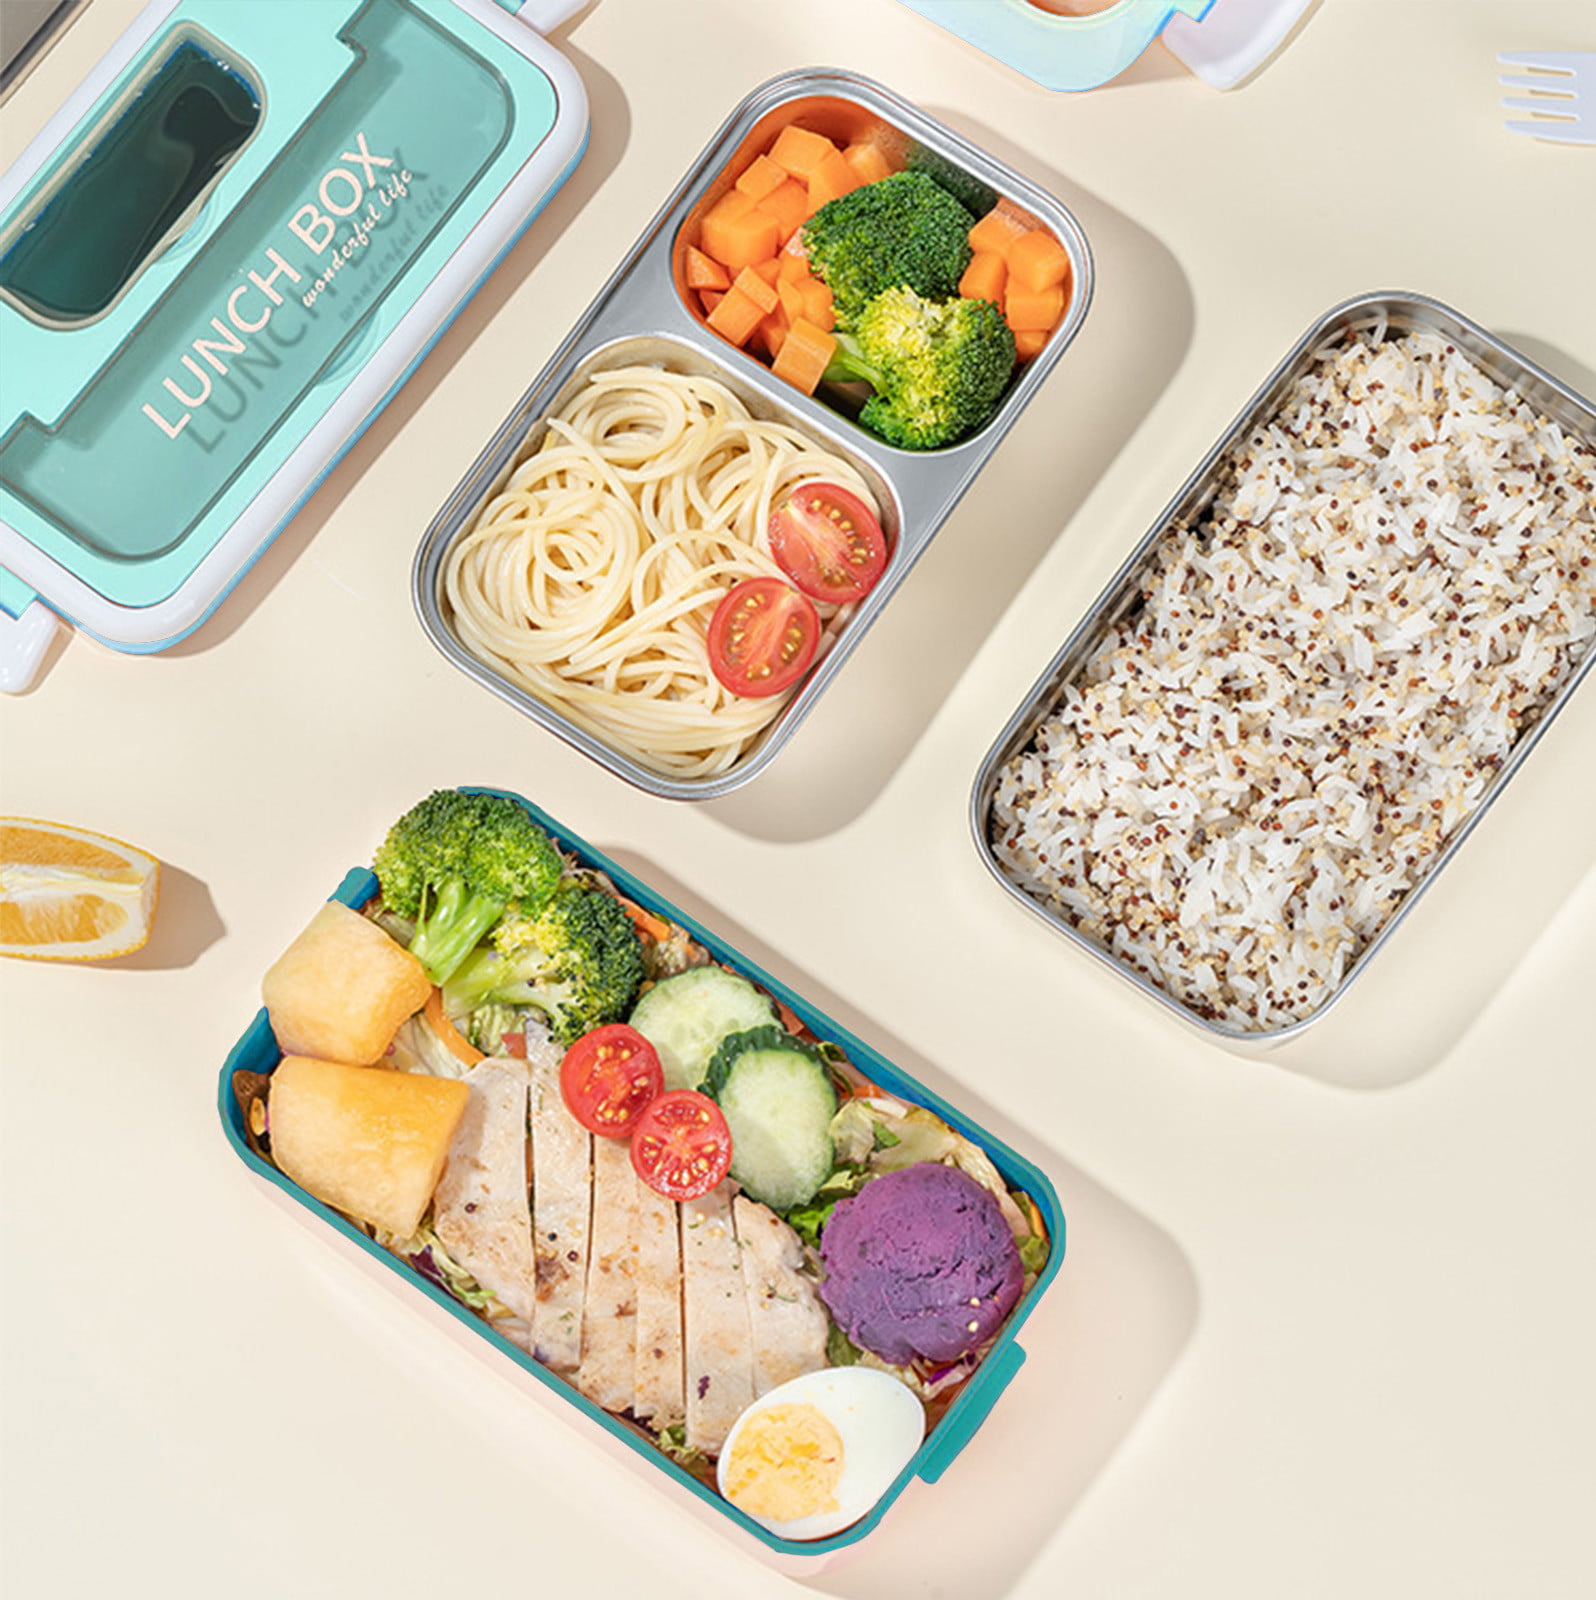 MISS BIG Bento Box, Lunch Box Kids,Ideal Leak Proof Lunch Box Containers,  Mom's Choice Kids Lunch Bo…See more MISS BIG Bento Box, Lunch Box  Kids,Ideal